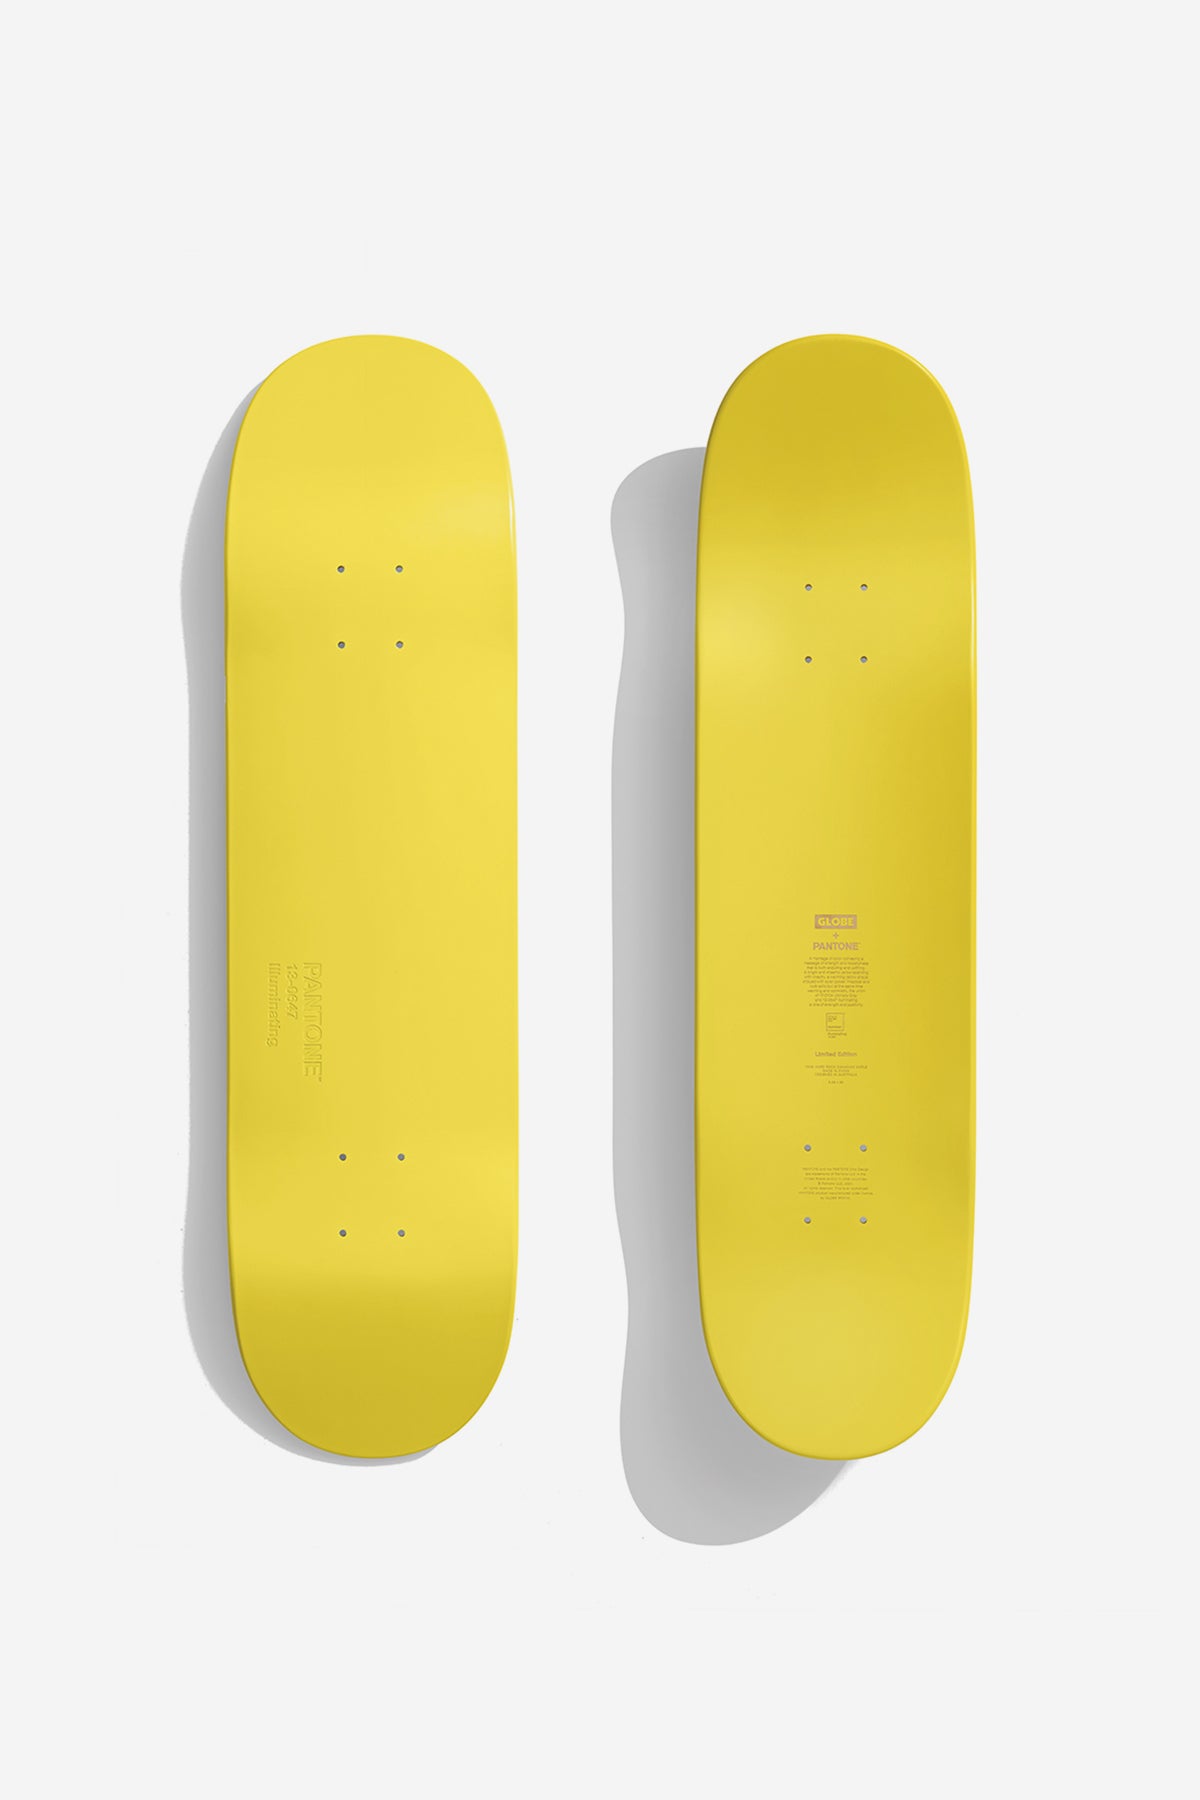 yellow decks include in the Globe + Pantone Color of the Year™ Box Set